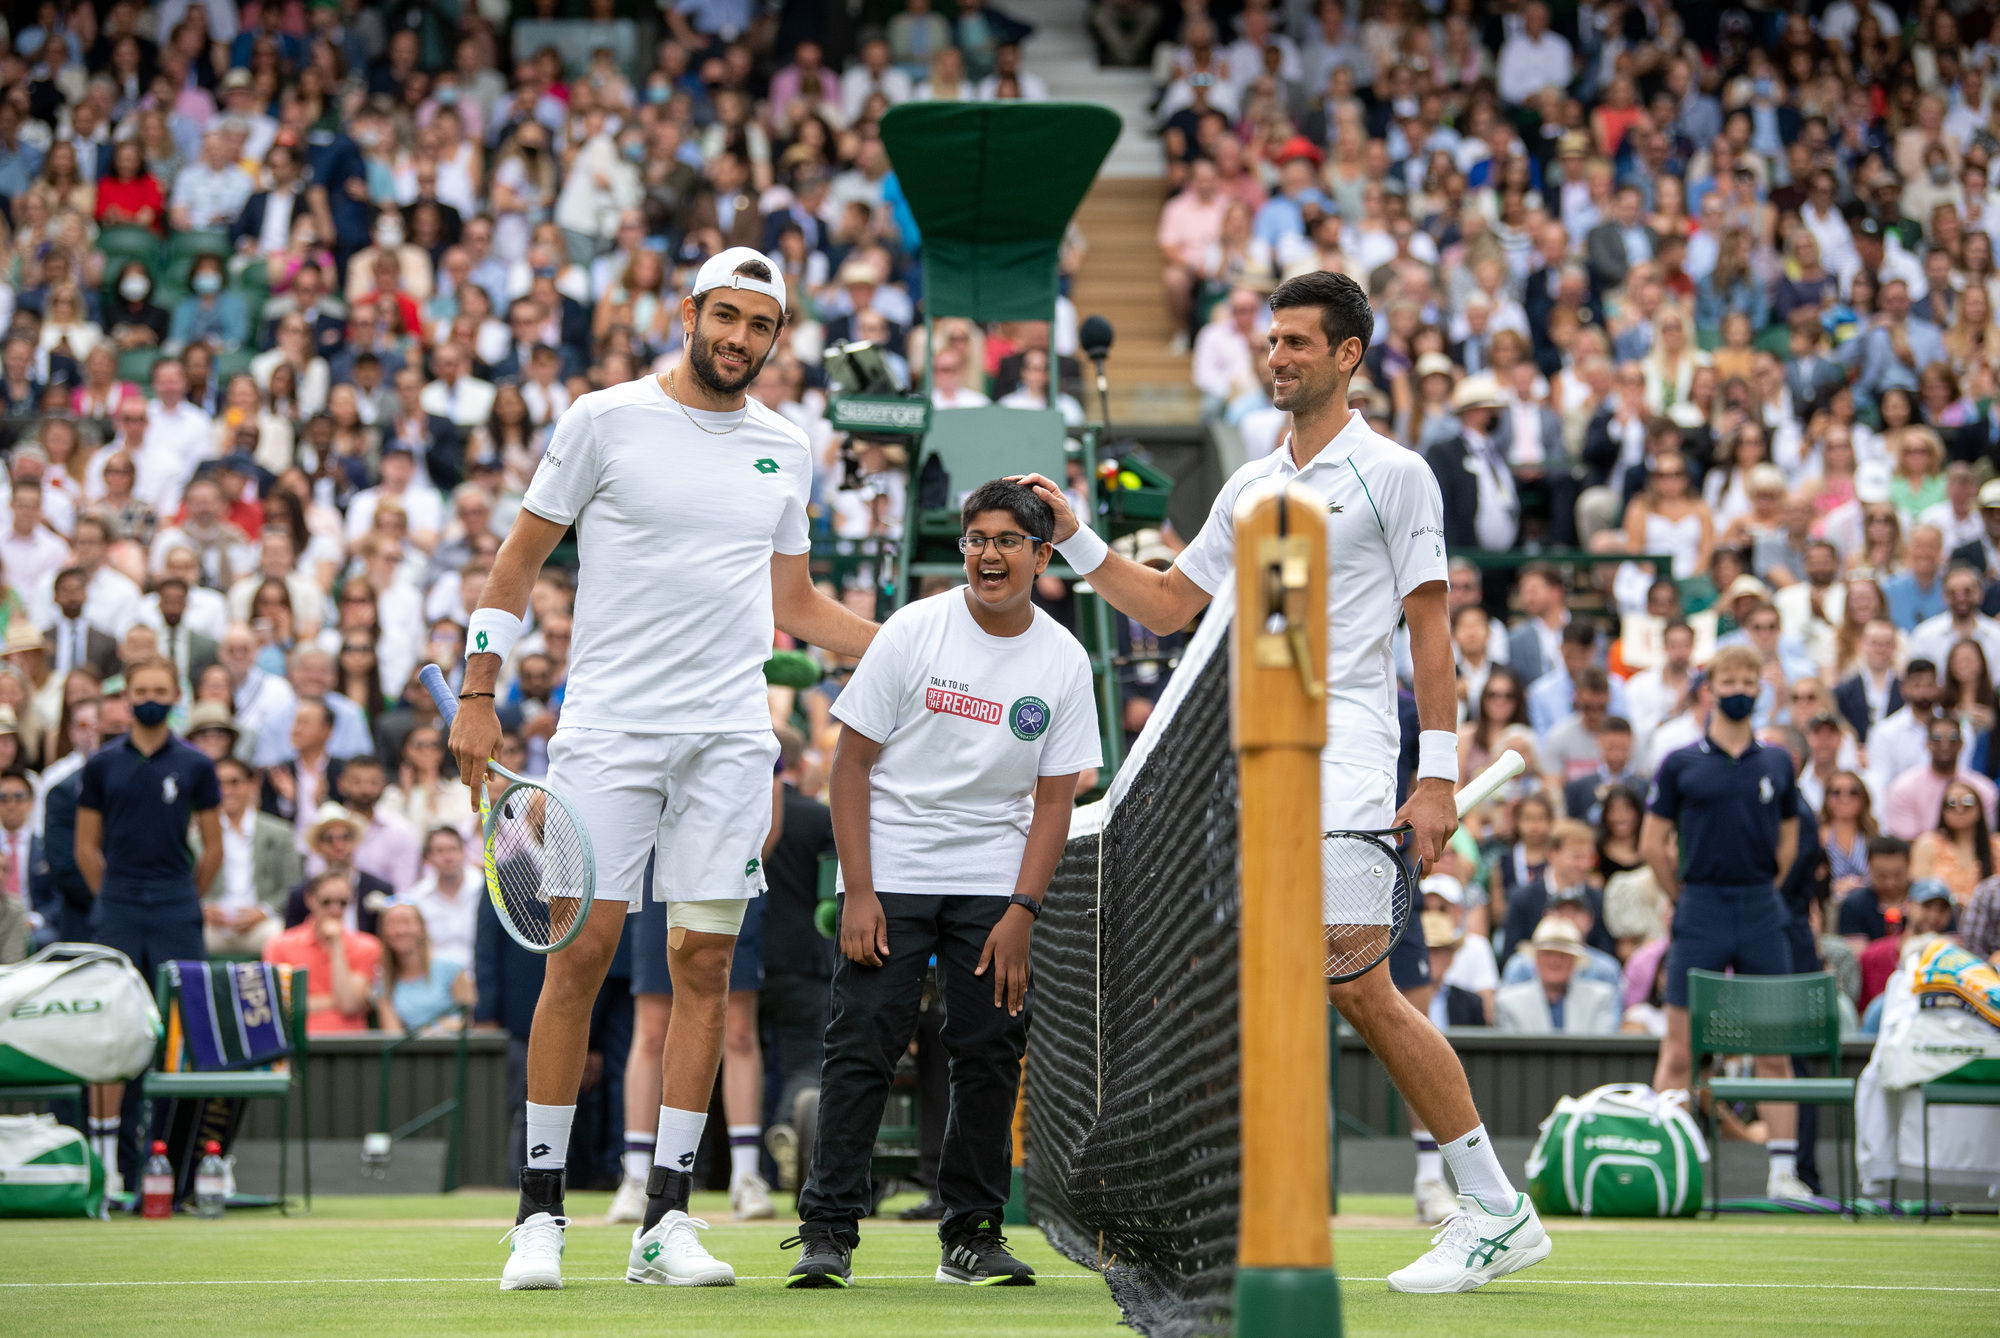 In pics: Special moments from the Wimbledon men’s final